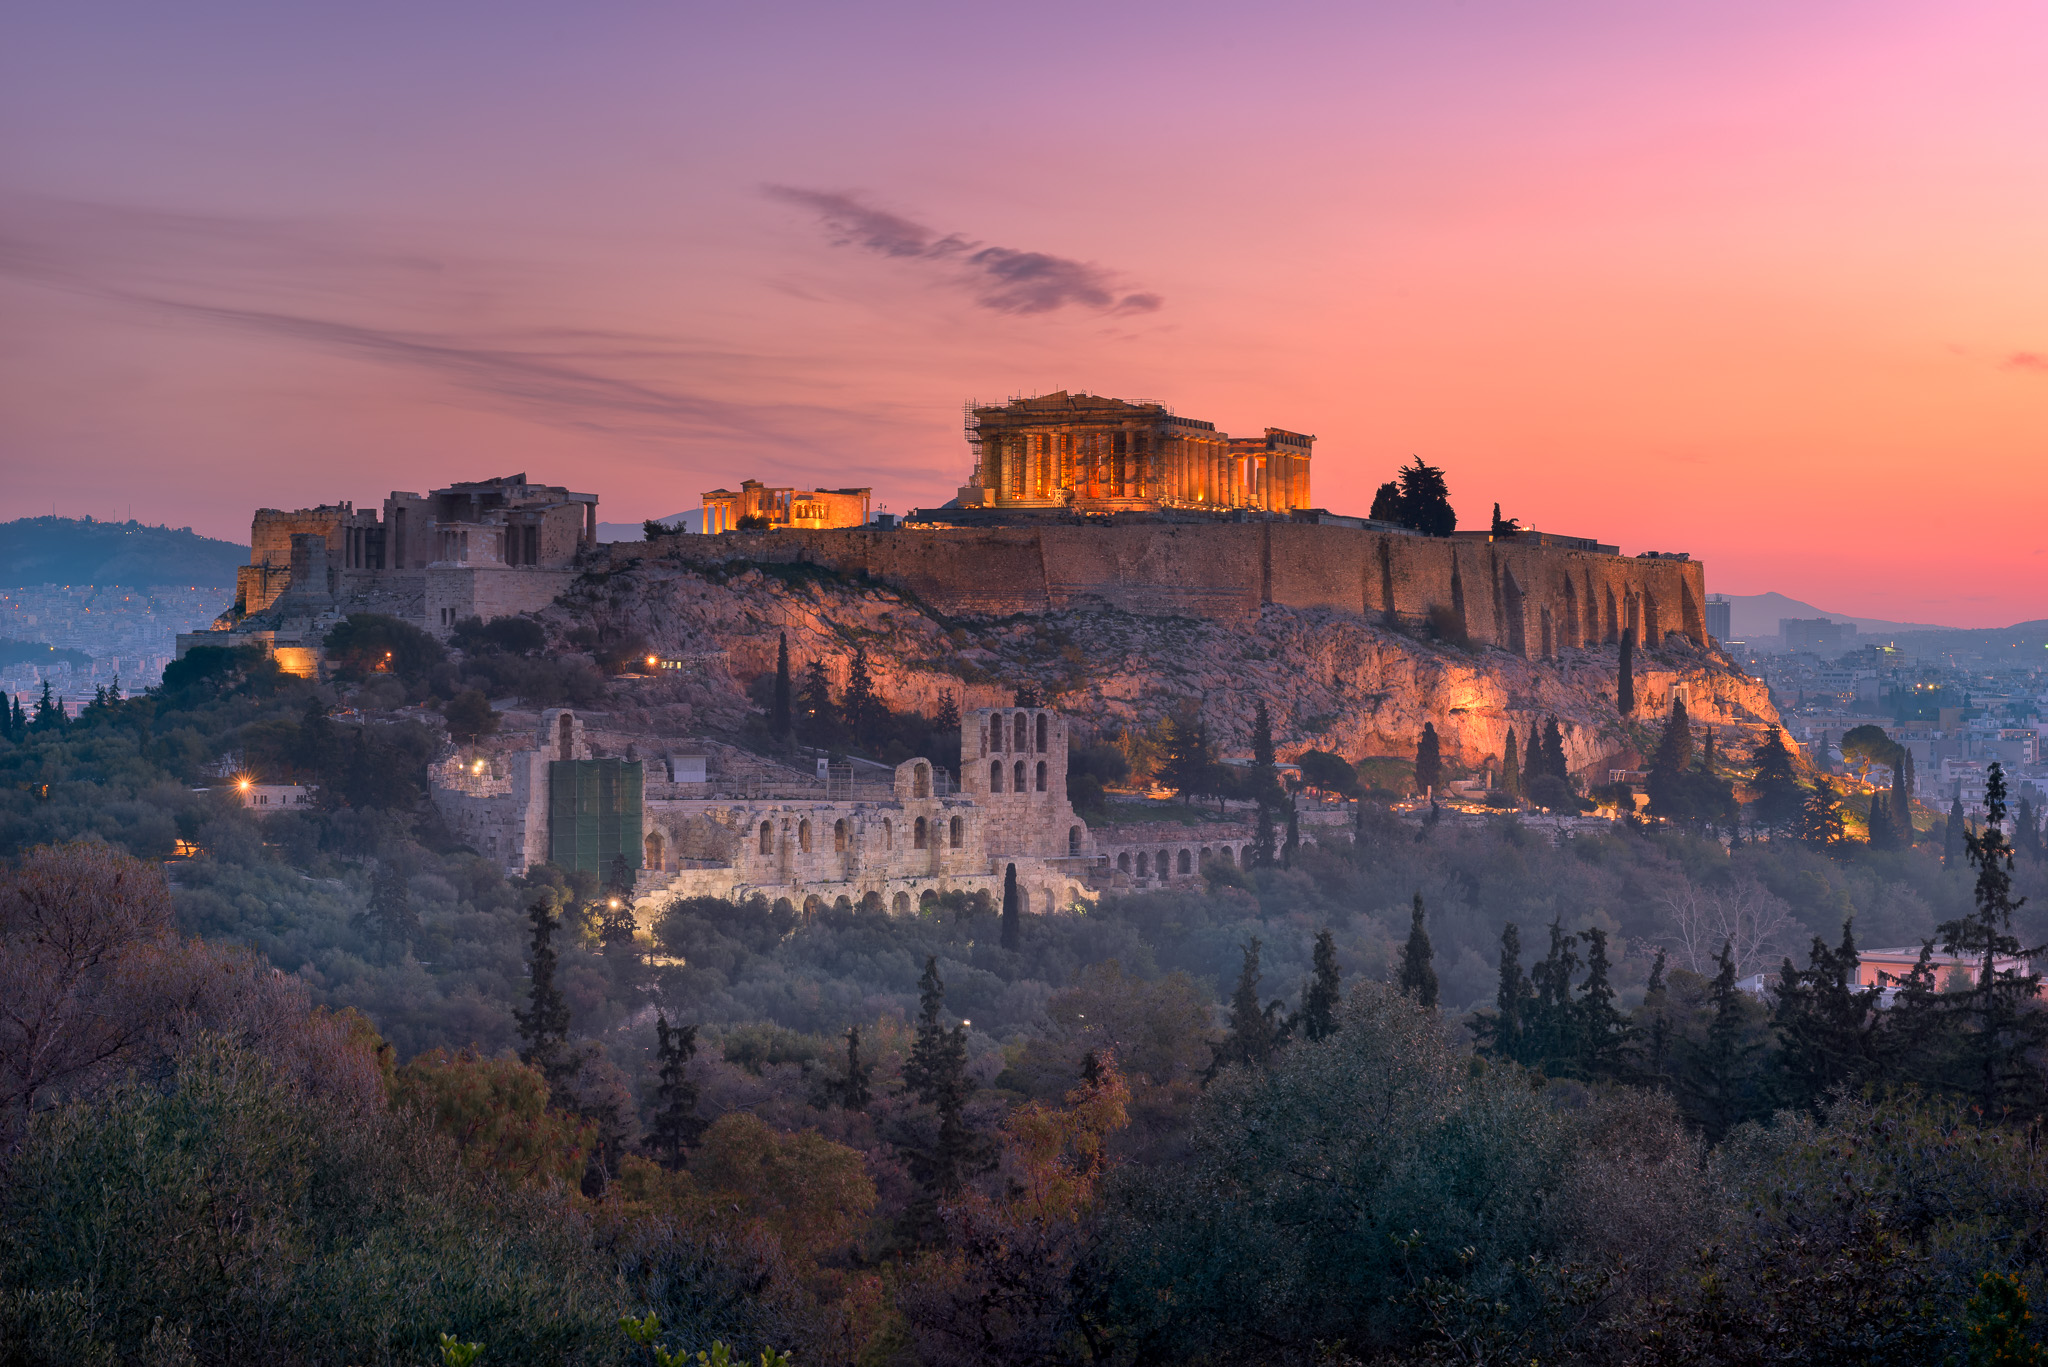 View of Acropolis from the Philopappos Hill in the Morning